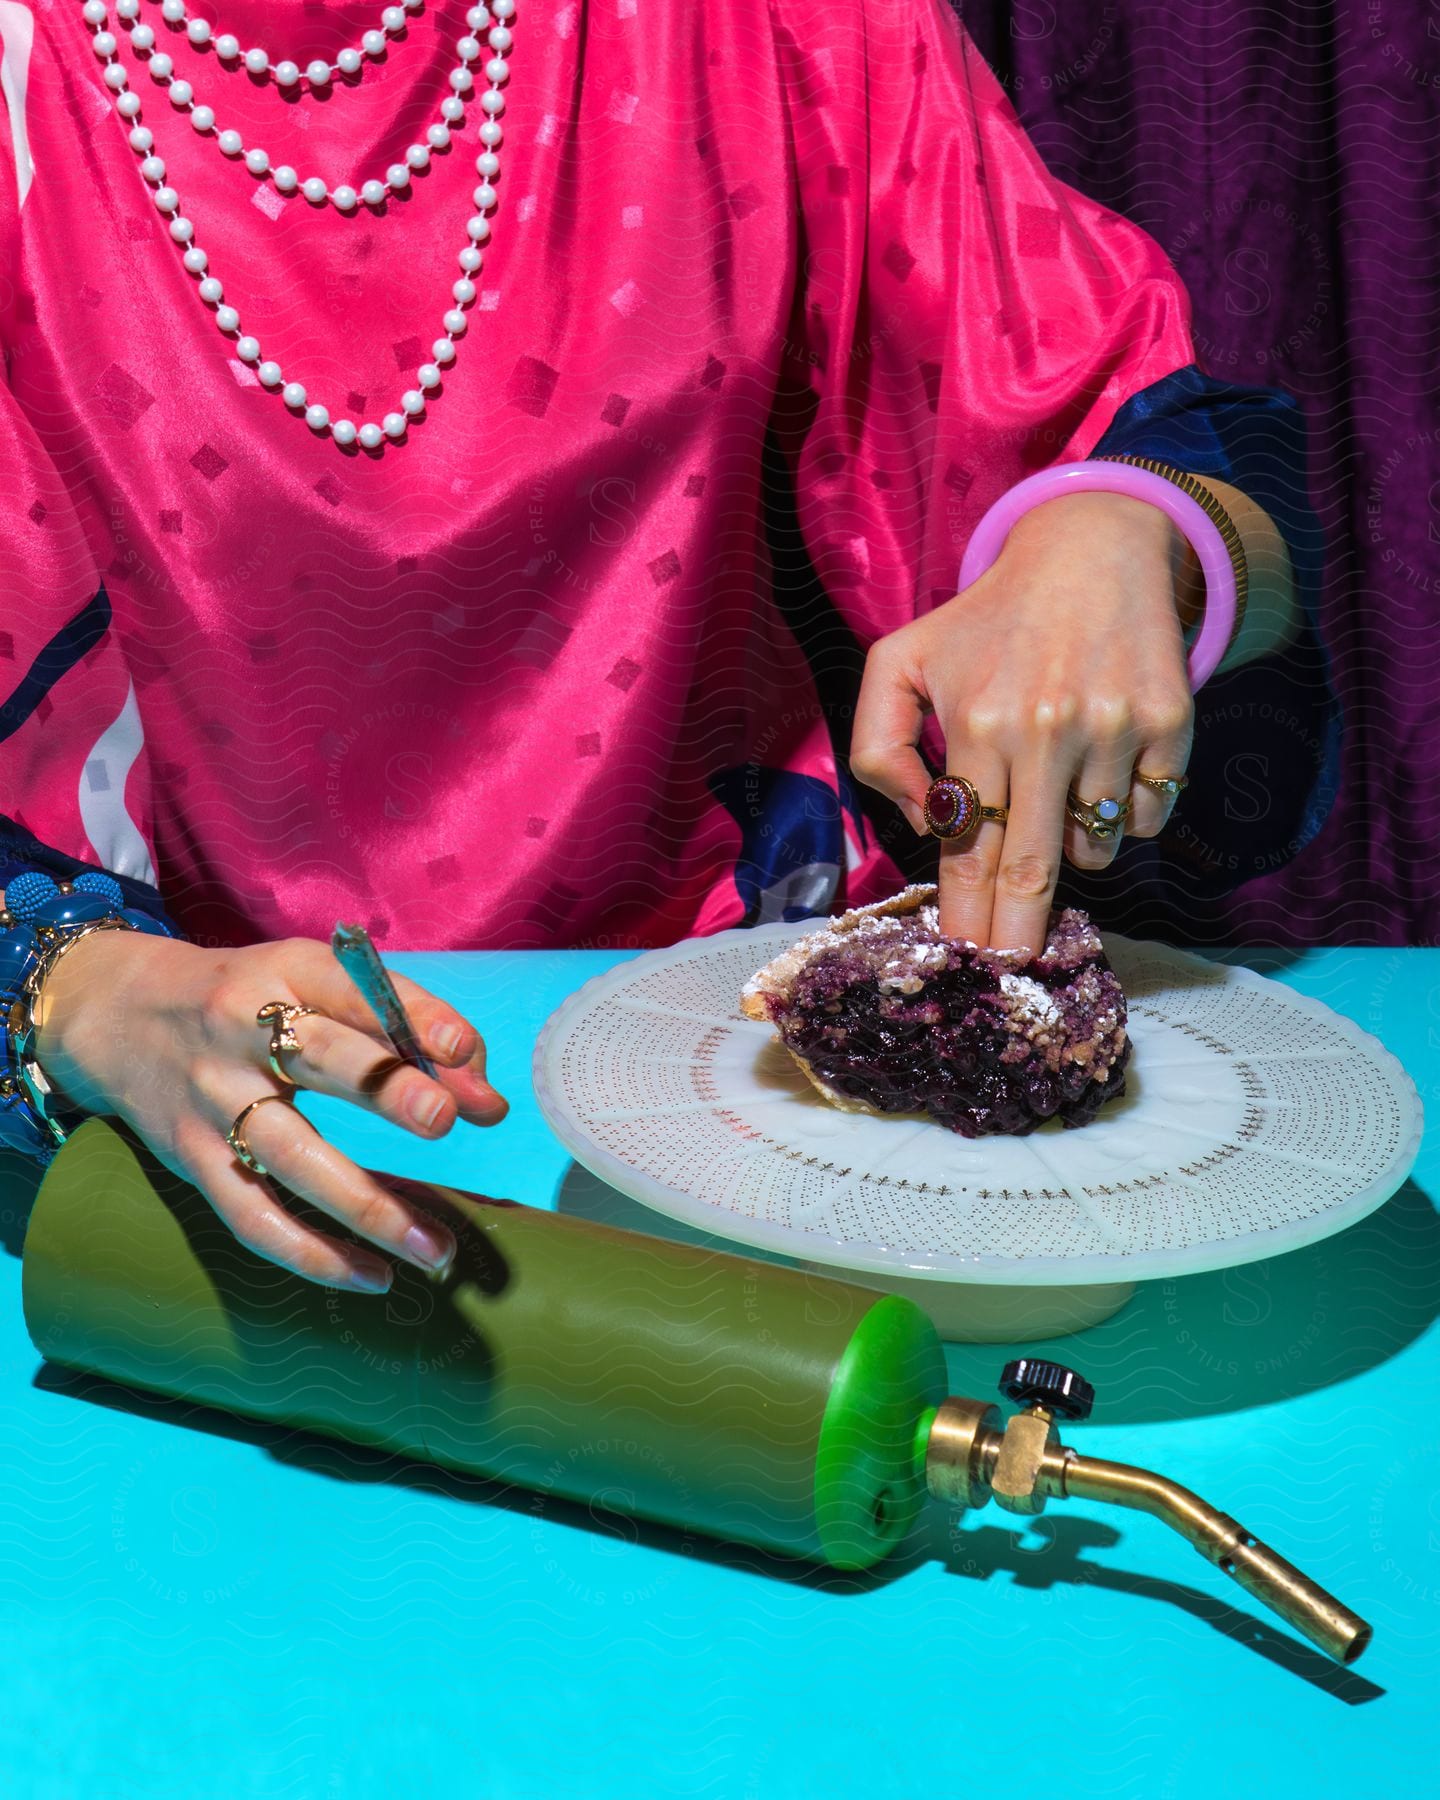 A woman in a flowing pink garment presses her fingers into a piece of blueberry pie on a table next to a blowtorch.